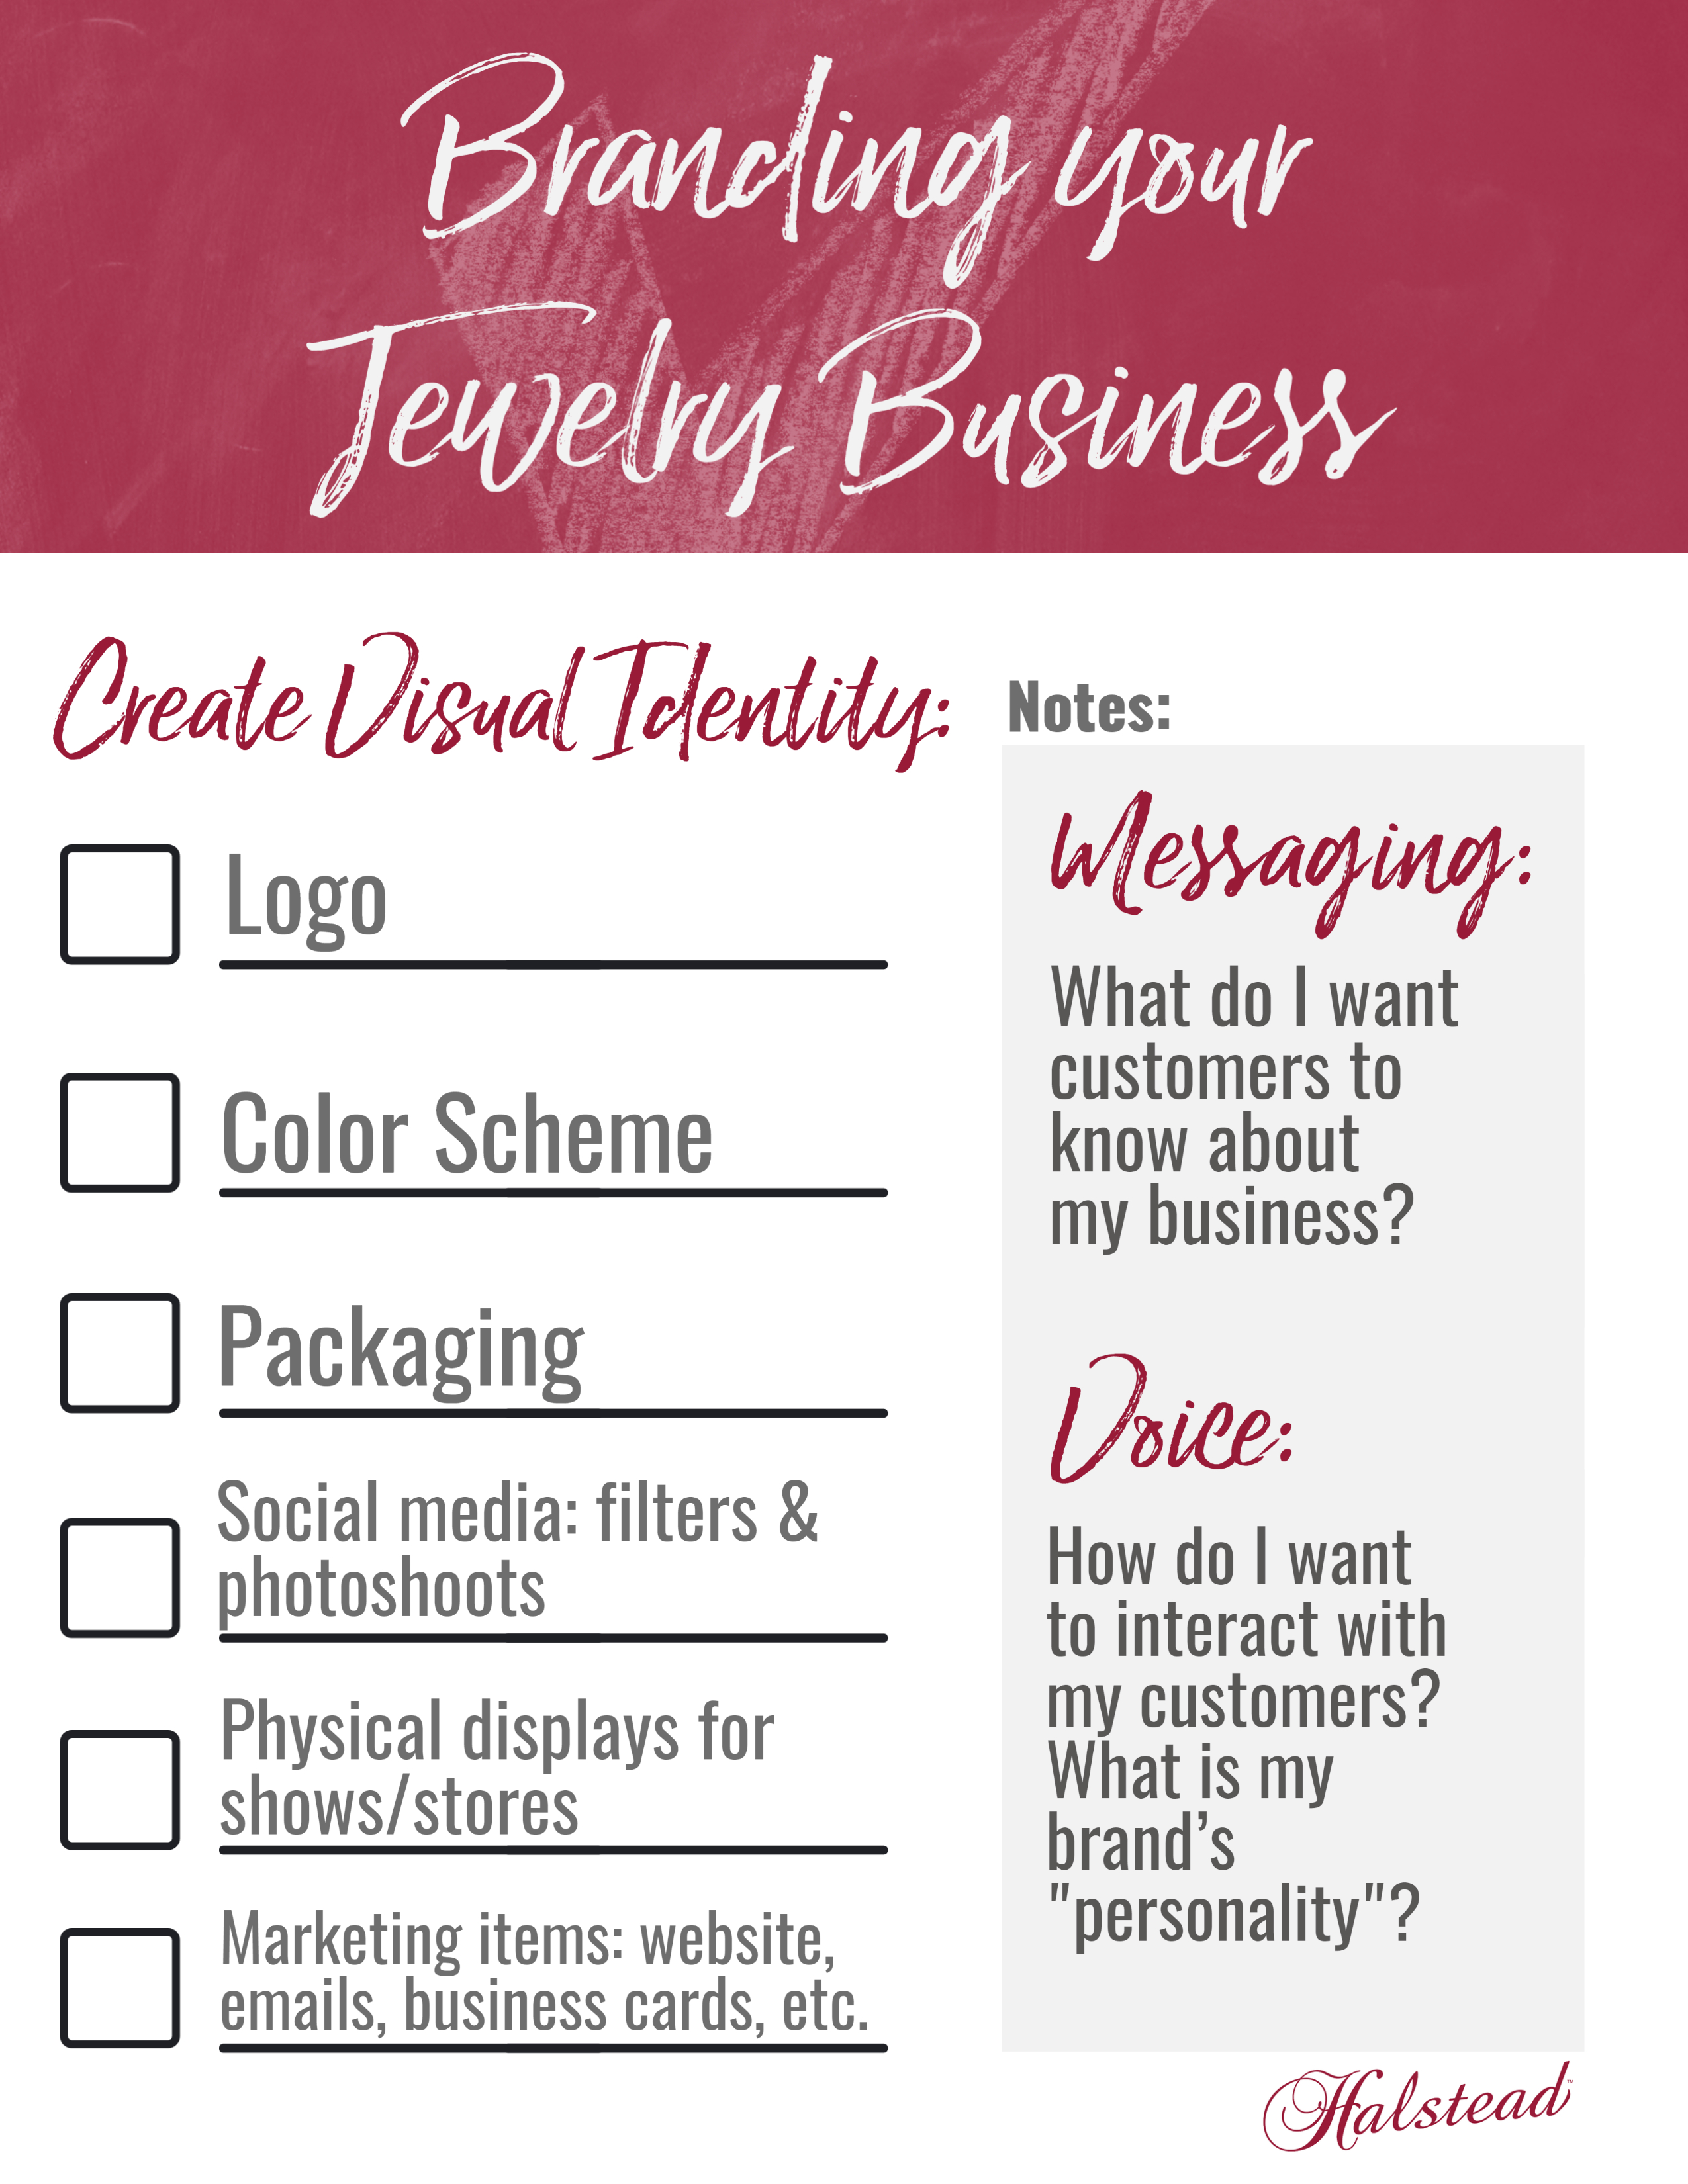 Branding your jewelry business checklist